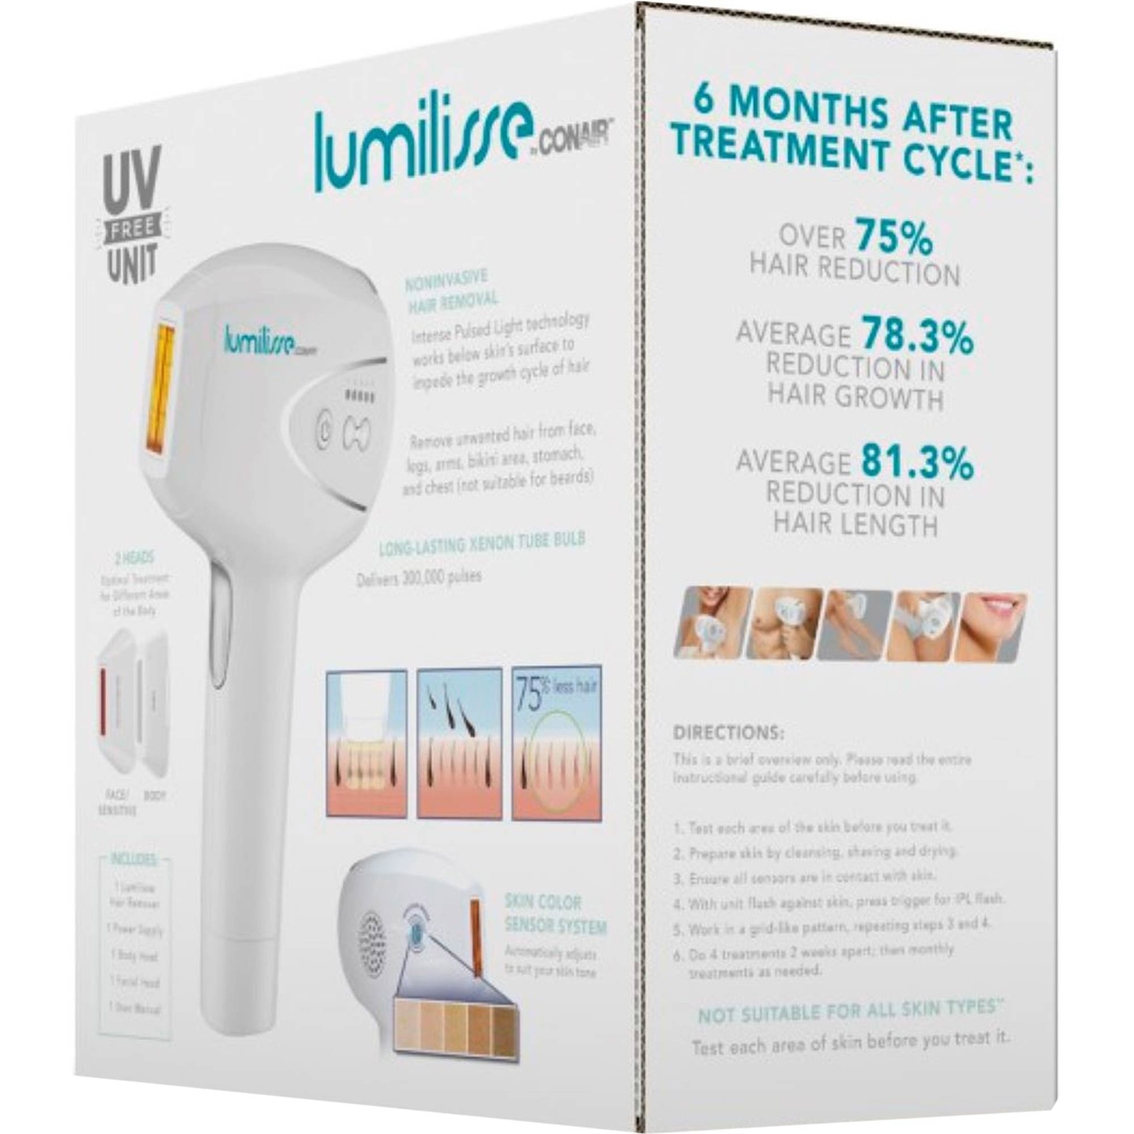 Conair Lumilisse Intense Pulsed Light Hair Removal Device - Image 10 of 10